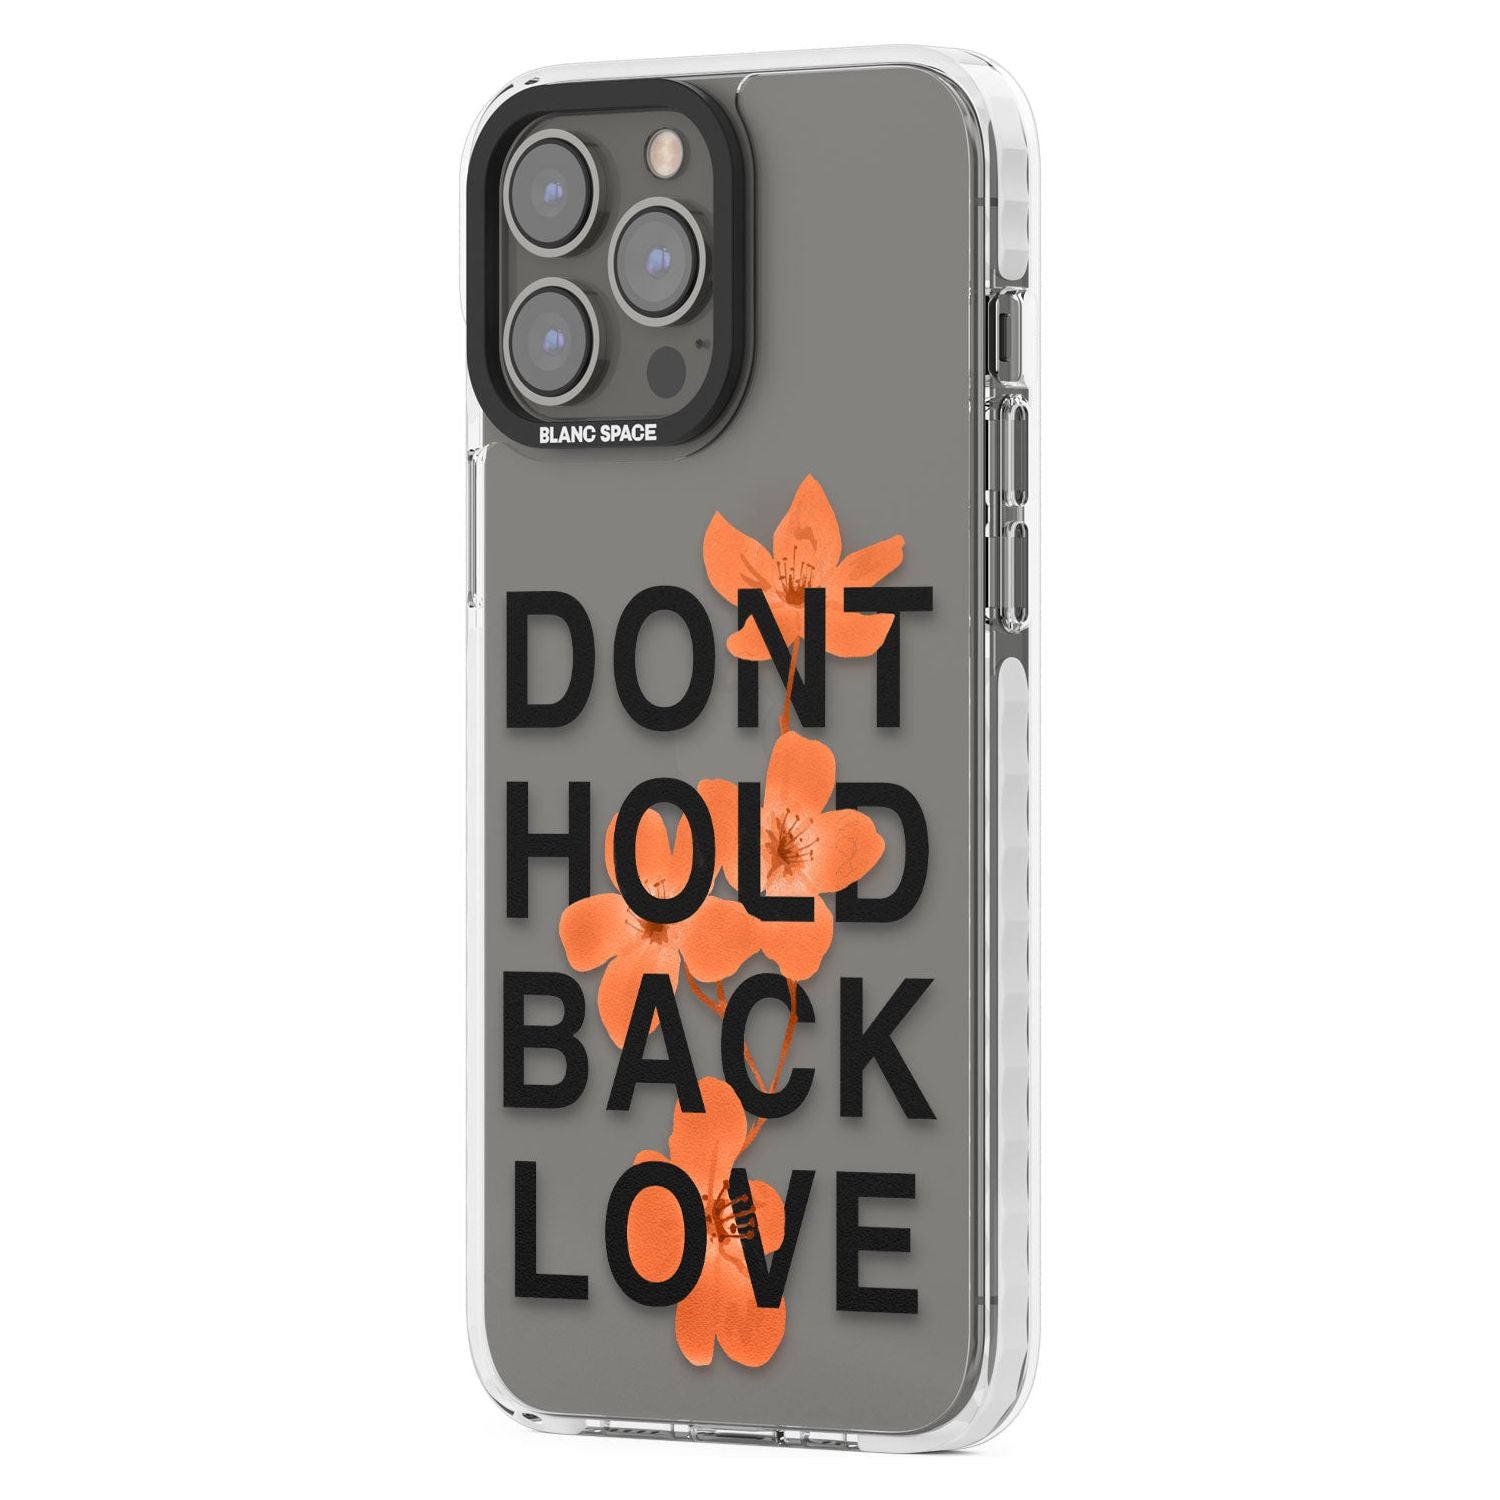 Don't Hold Back Love - Blue & WhitePhone Case for iPhone 14 Pro Max